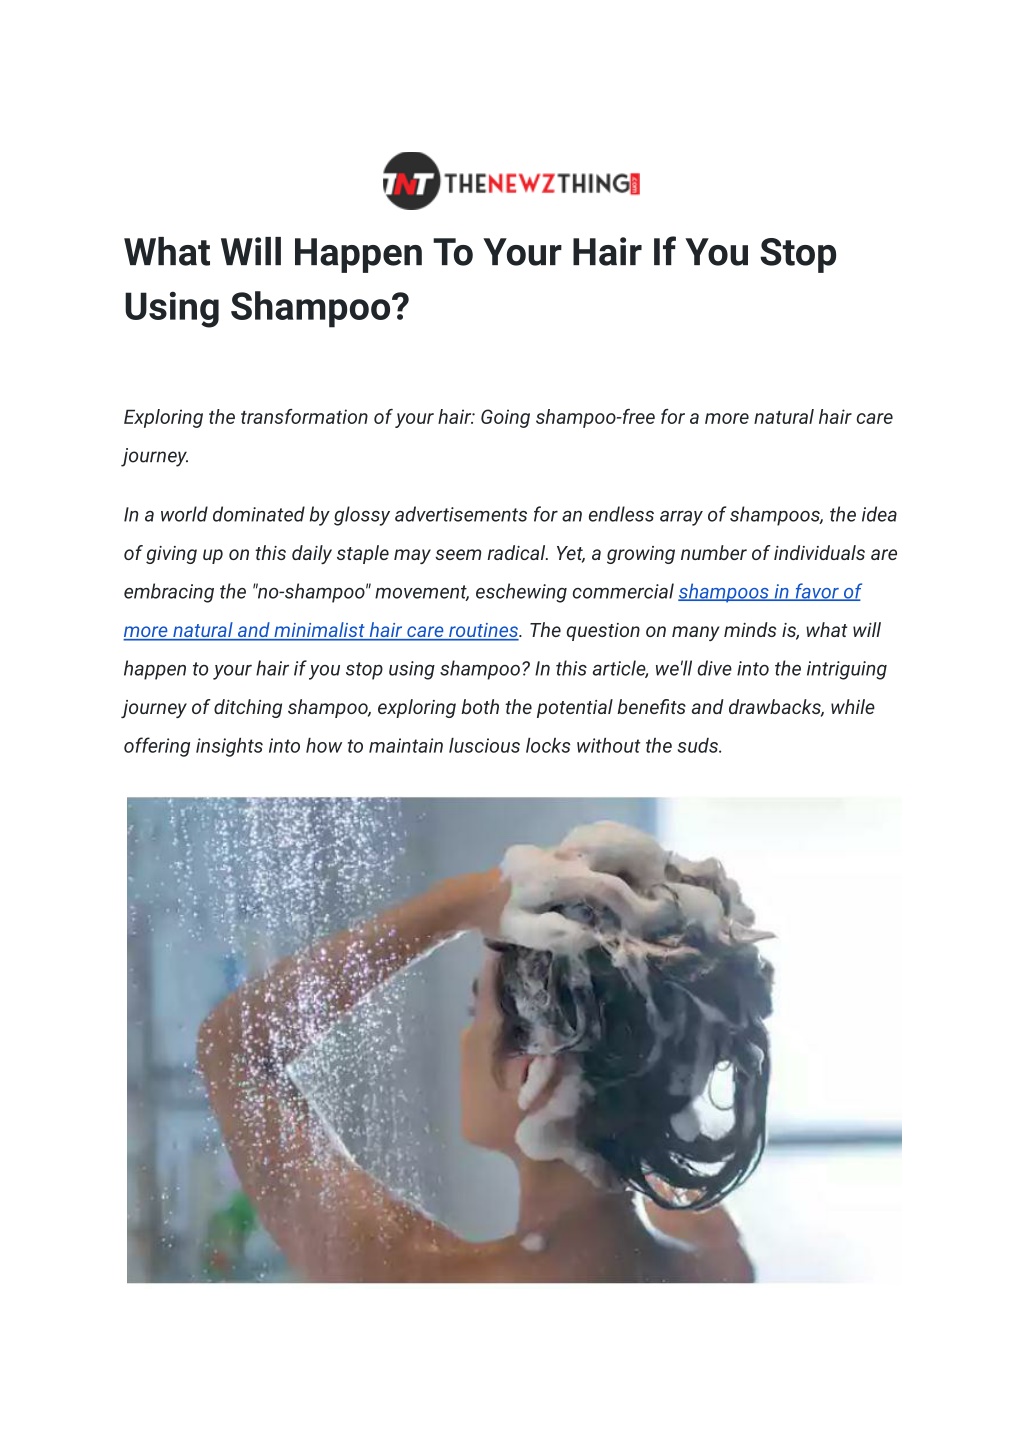 Ppt What Will Happen To Your Hair If You Stop Using Shampoo